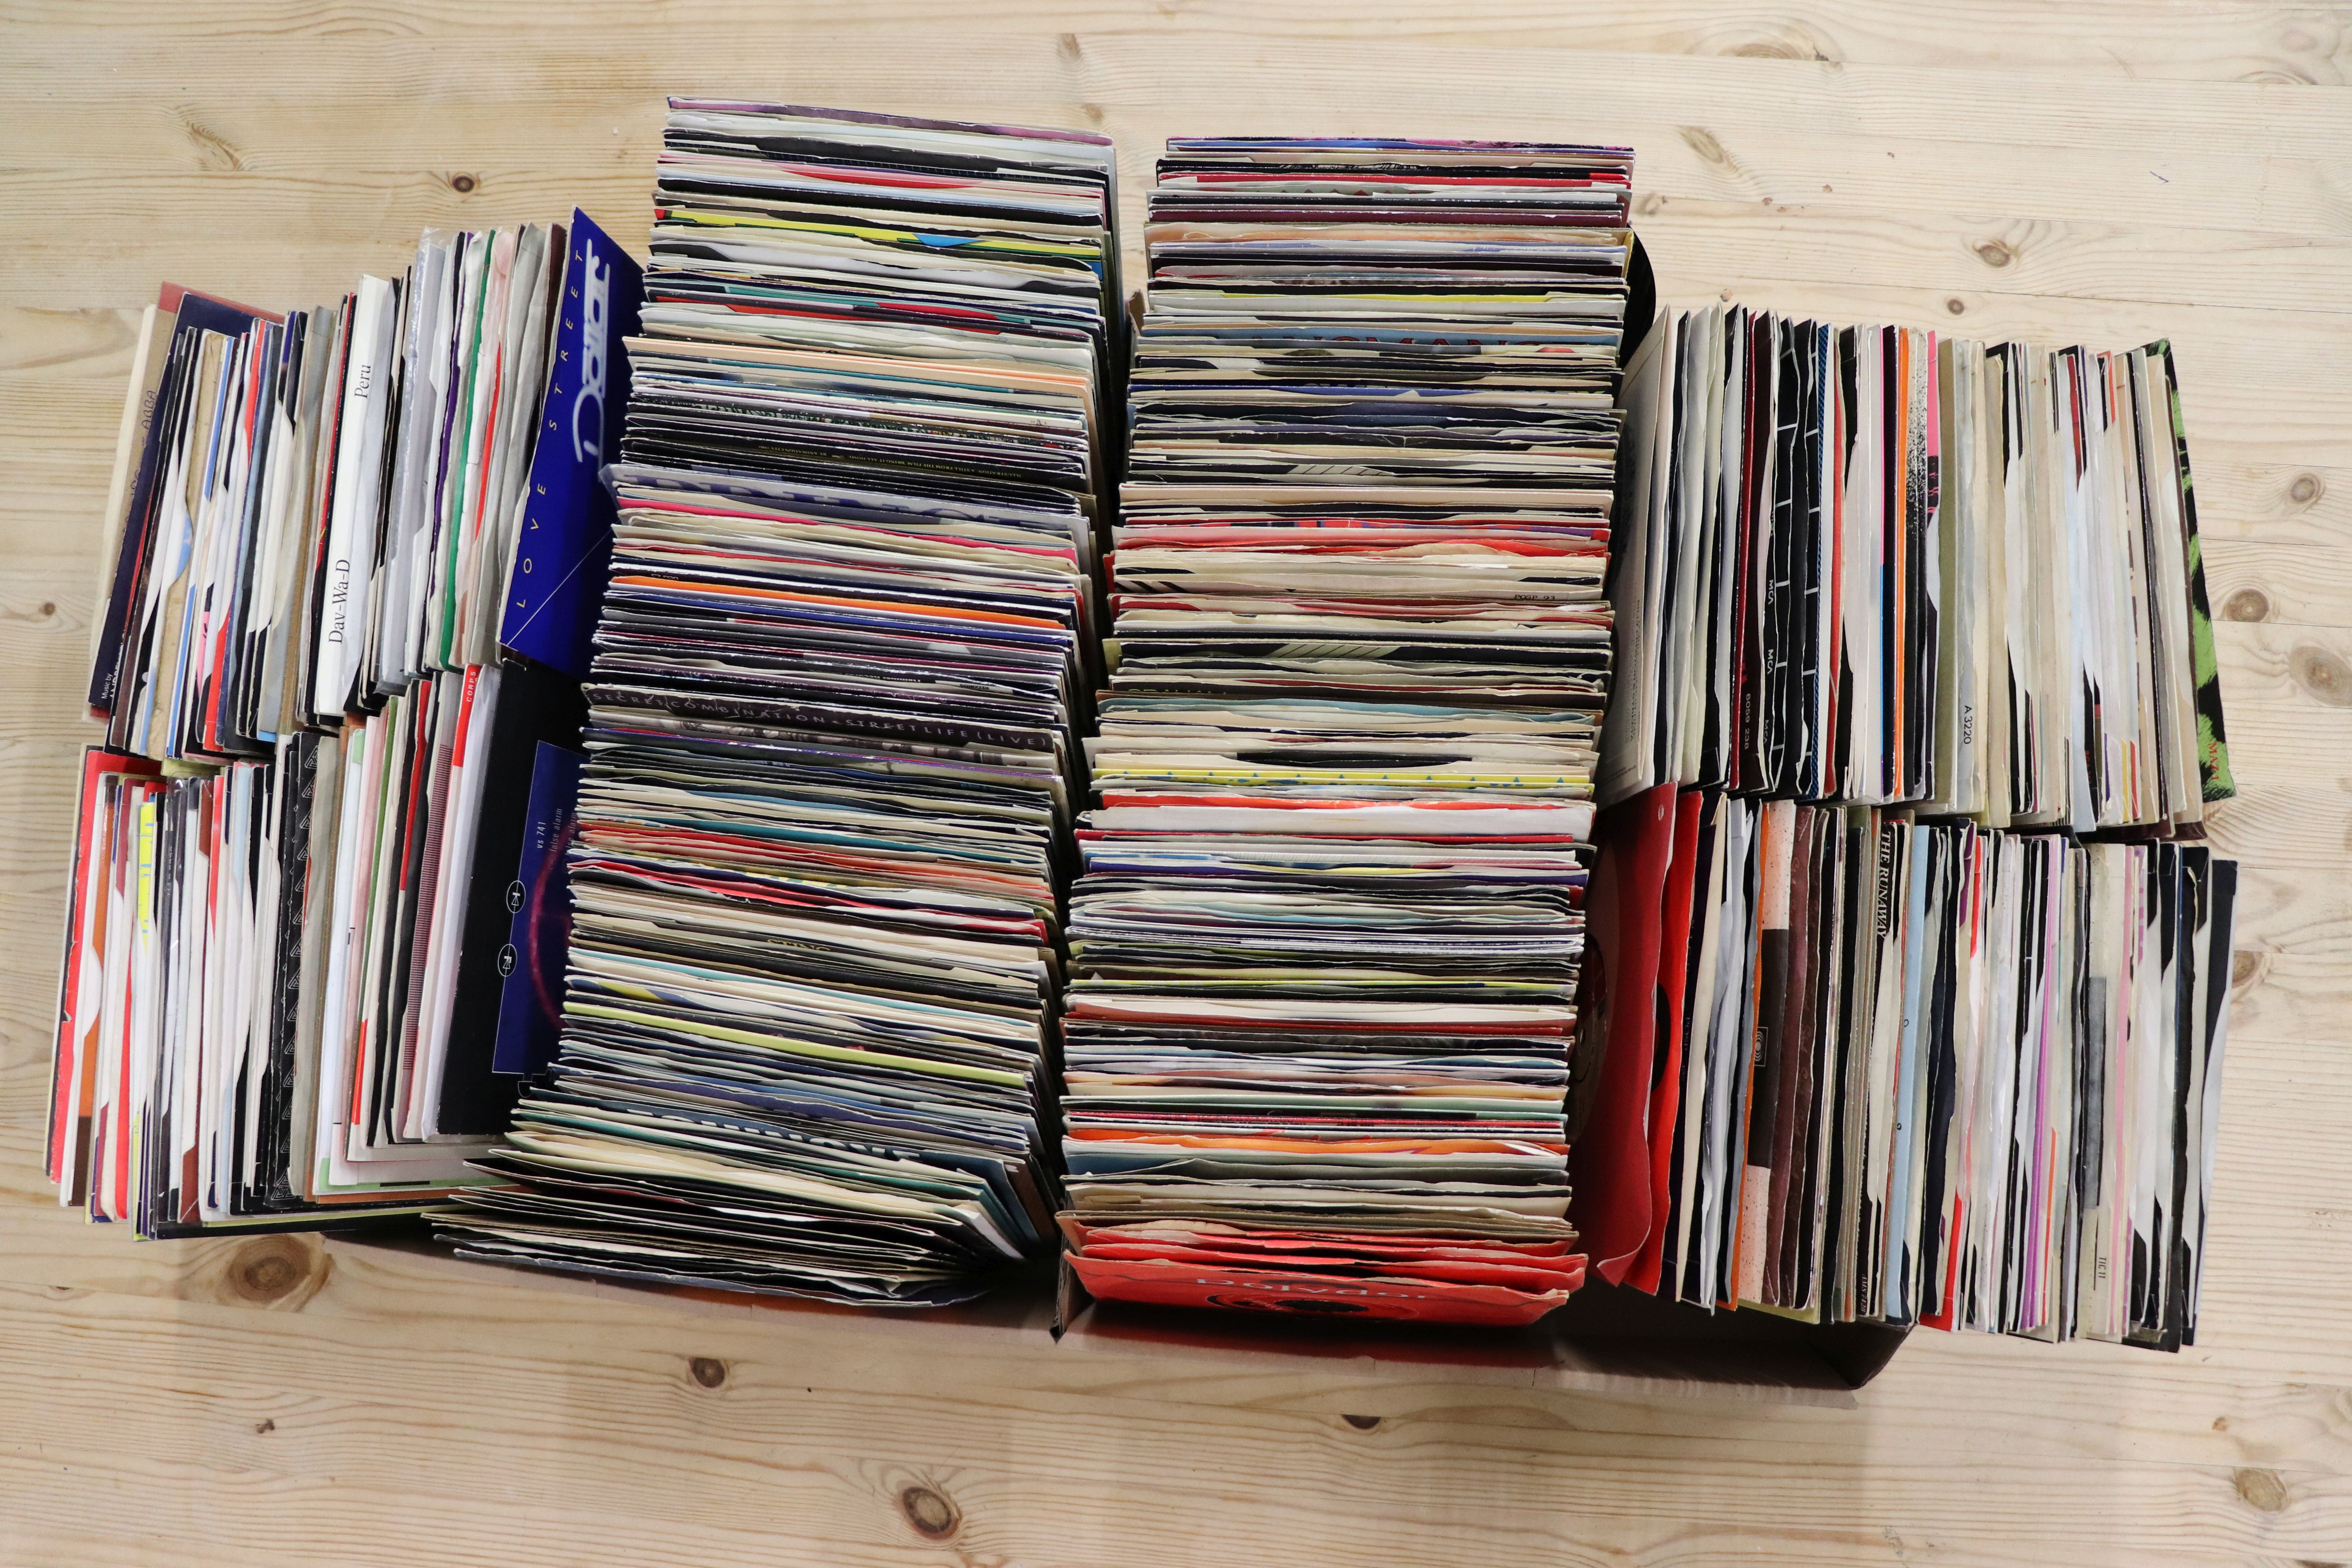 Vinyl - Collection of over 500 45s most in company sleeves from the 80s & 90s, sleeves and vinyl